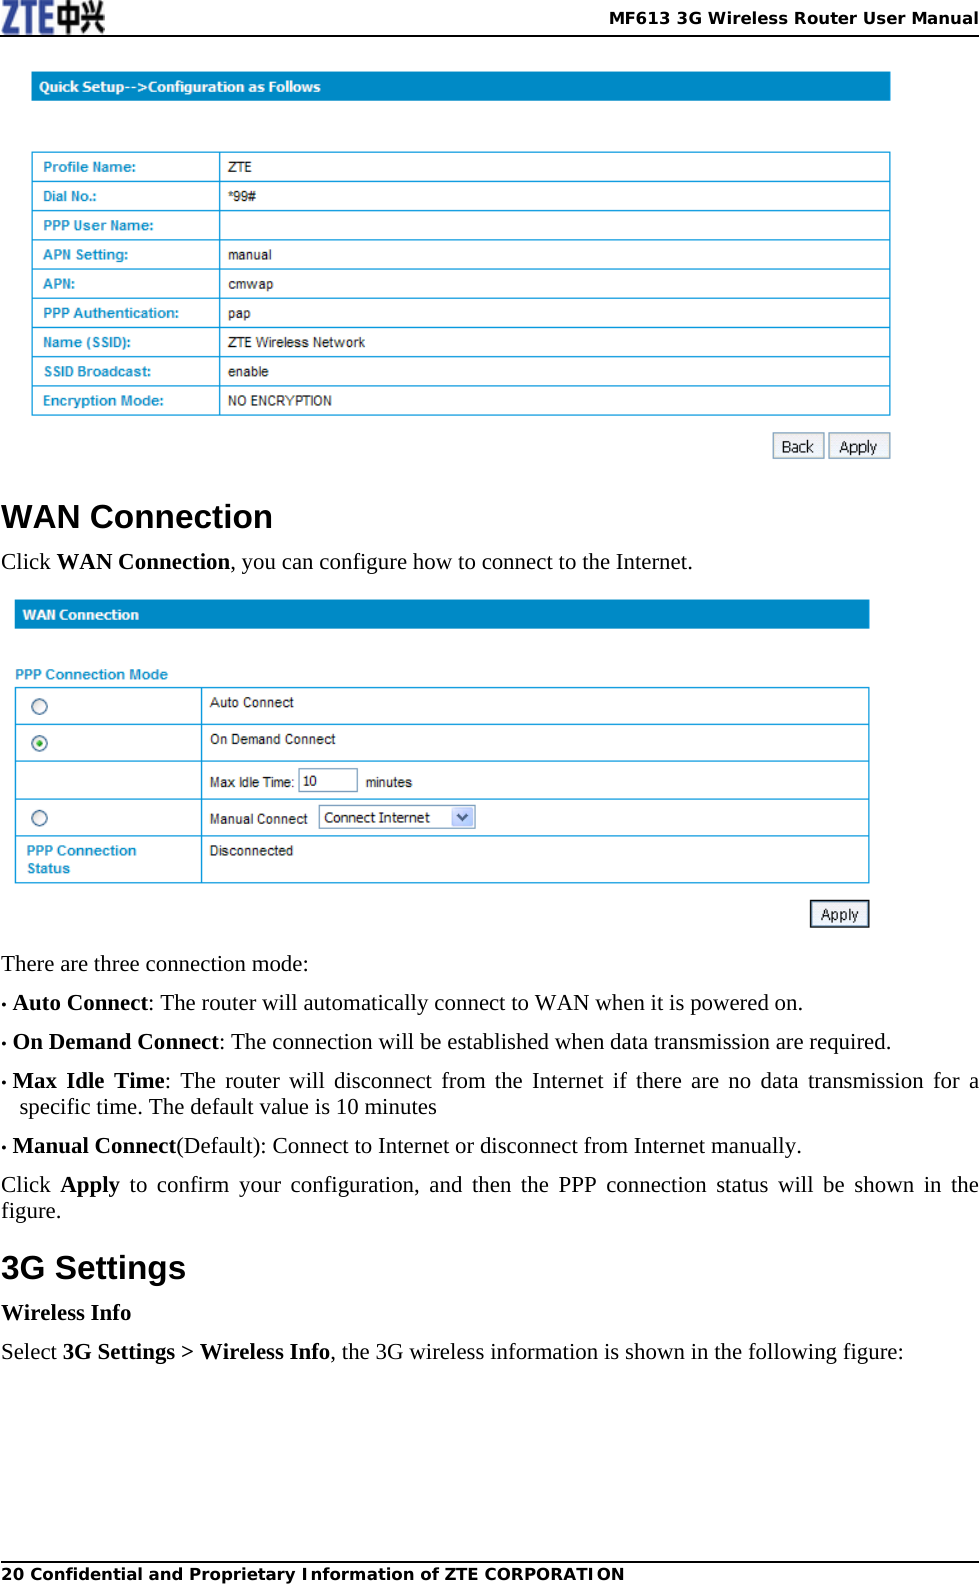   MF613 3G Wireless Router User Manual20 Confidential and Proprietary Information of ZTE CORPORATION WAN Connection Click WAN Connection, you can configure how to connect to the Internet.  There are three connection mode: • Auto Connect: The router will automatically connect to WAN when it is powered on. • On Demand Connect: The connection will be established when data transmission are required. • Max Idle Time: The router will disconnect from the Internet if there are no data transmission for a specific time. The default value is 10 minutes • Manual Connect(Default): Connect to Internet or disconnect from Internet manually. Click  Apply to confirm your configuration, and then the PPP connection status will be shown in the figure. 3G Settings Wireless Info Select 3G Settings &gt; Wireless Info, the 3G wireless information is shown in the following figure: 